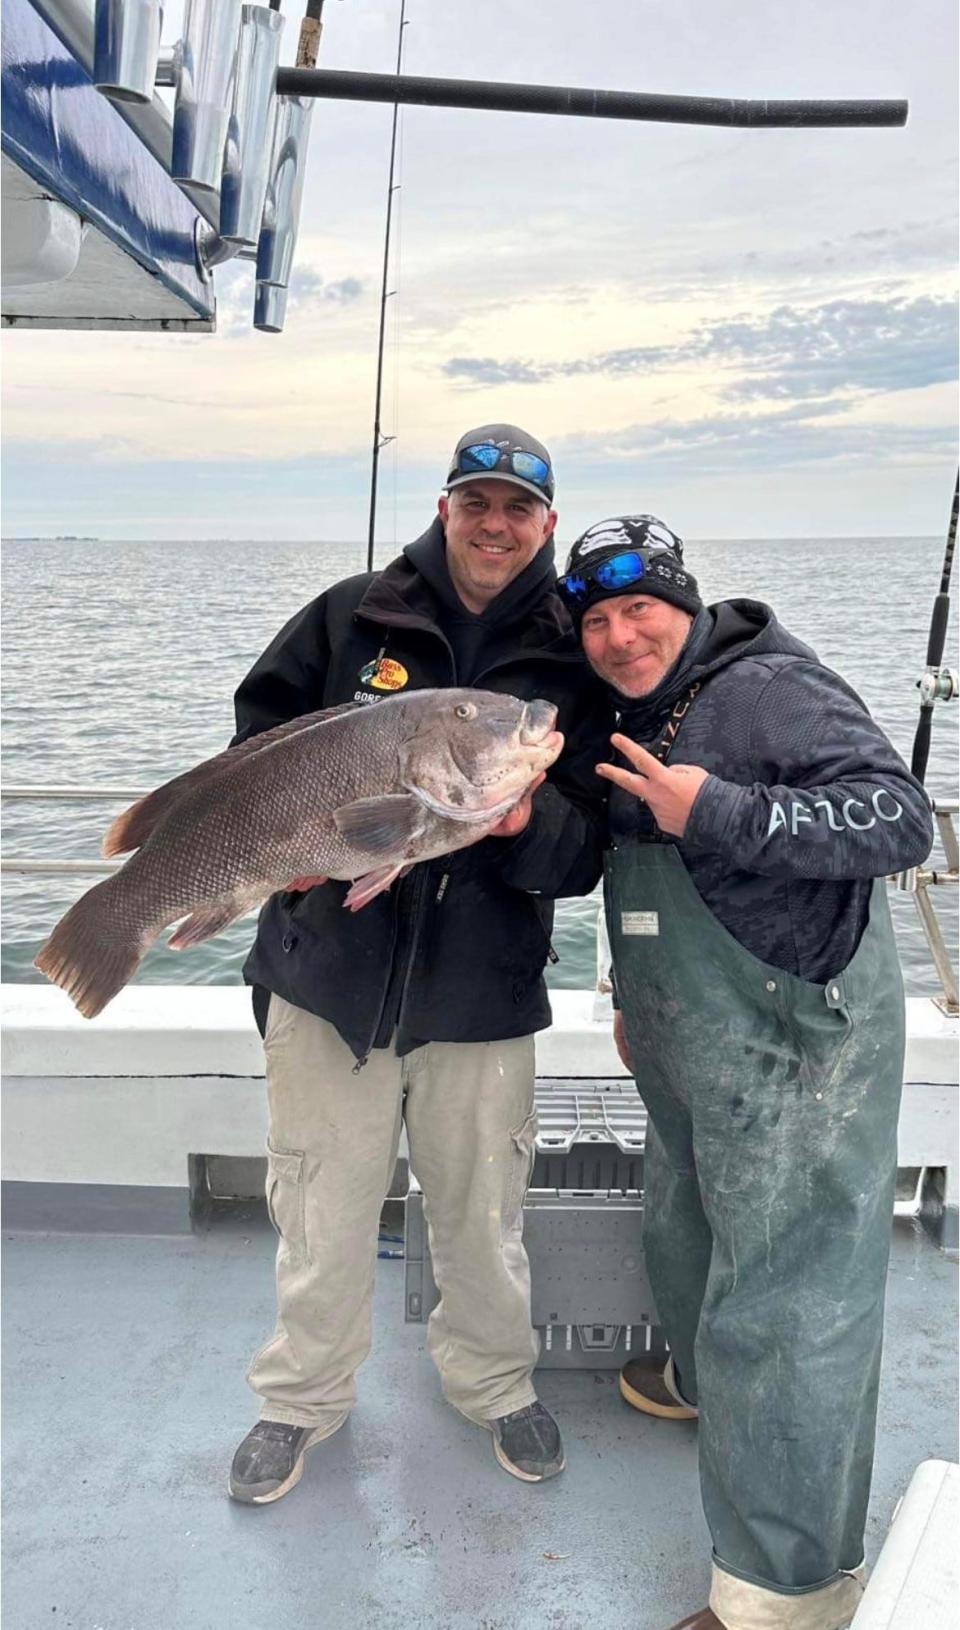 Thomas Fariello, left, holds up the 21-pound blackfish he caught fishing out of Cape May. Standing next to him is Anthony Emerick.